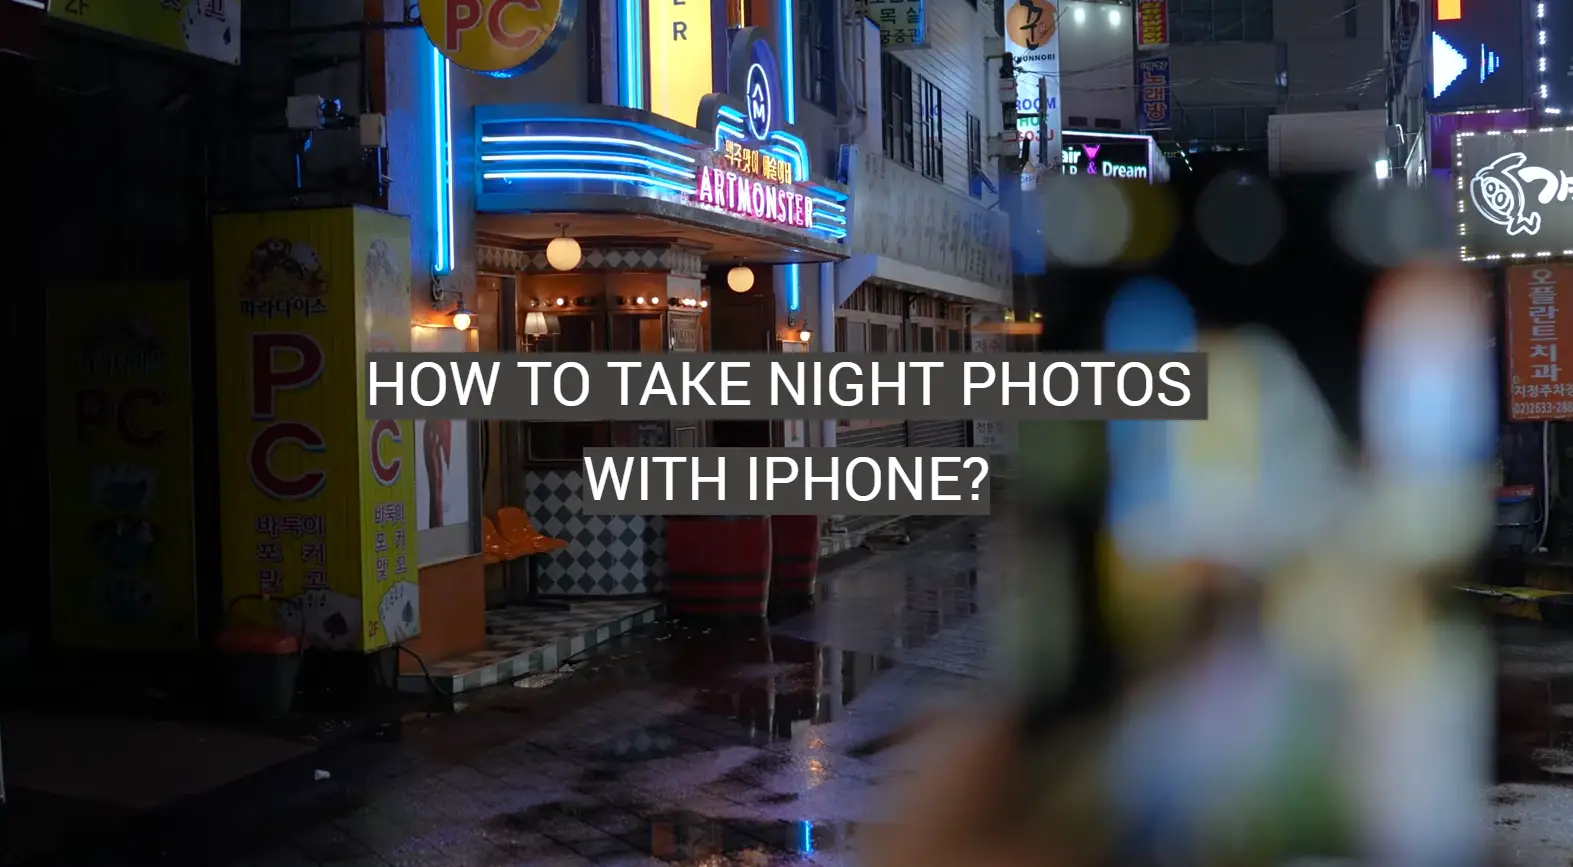 How to Take Night Photos With iPhone?